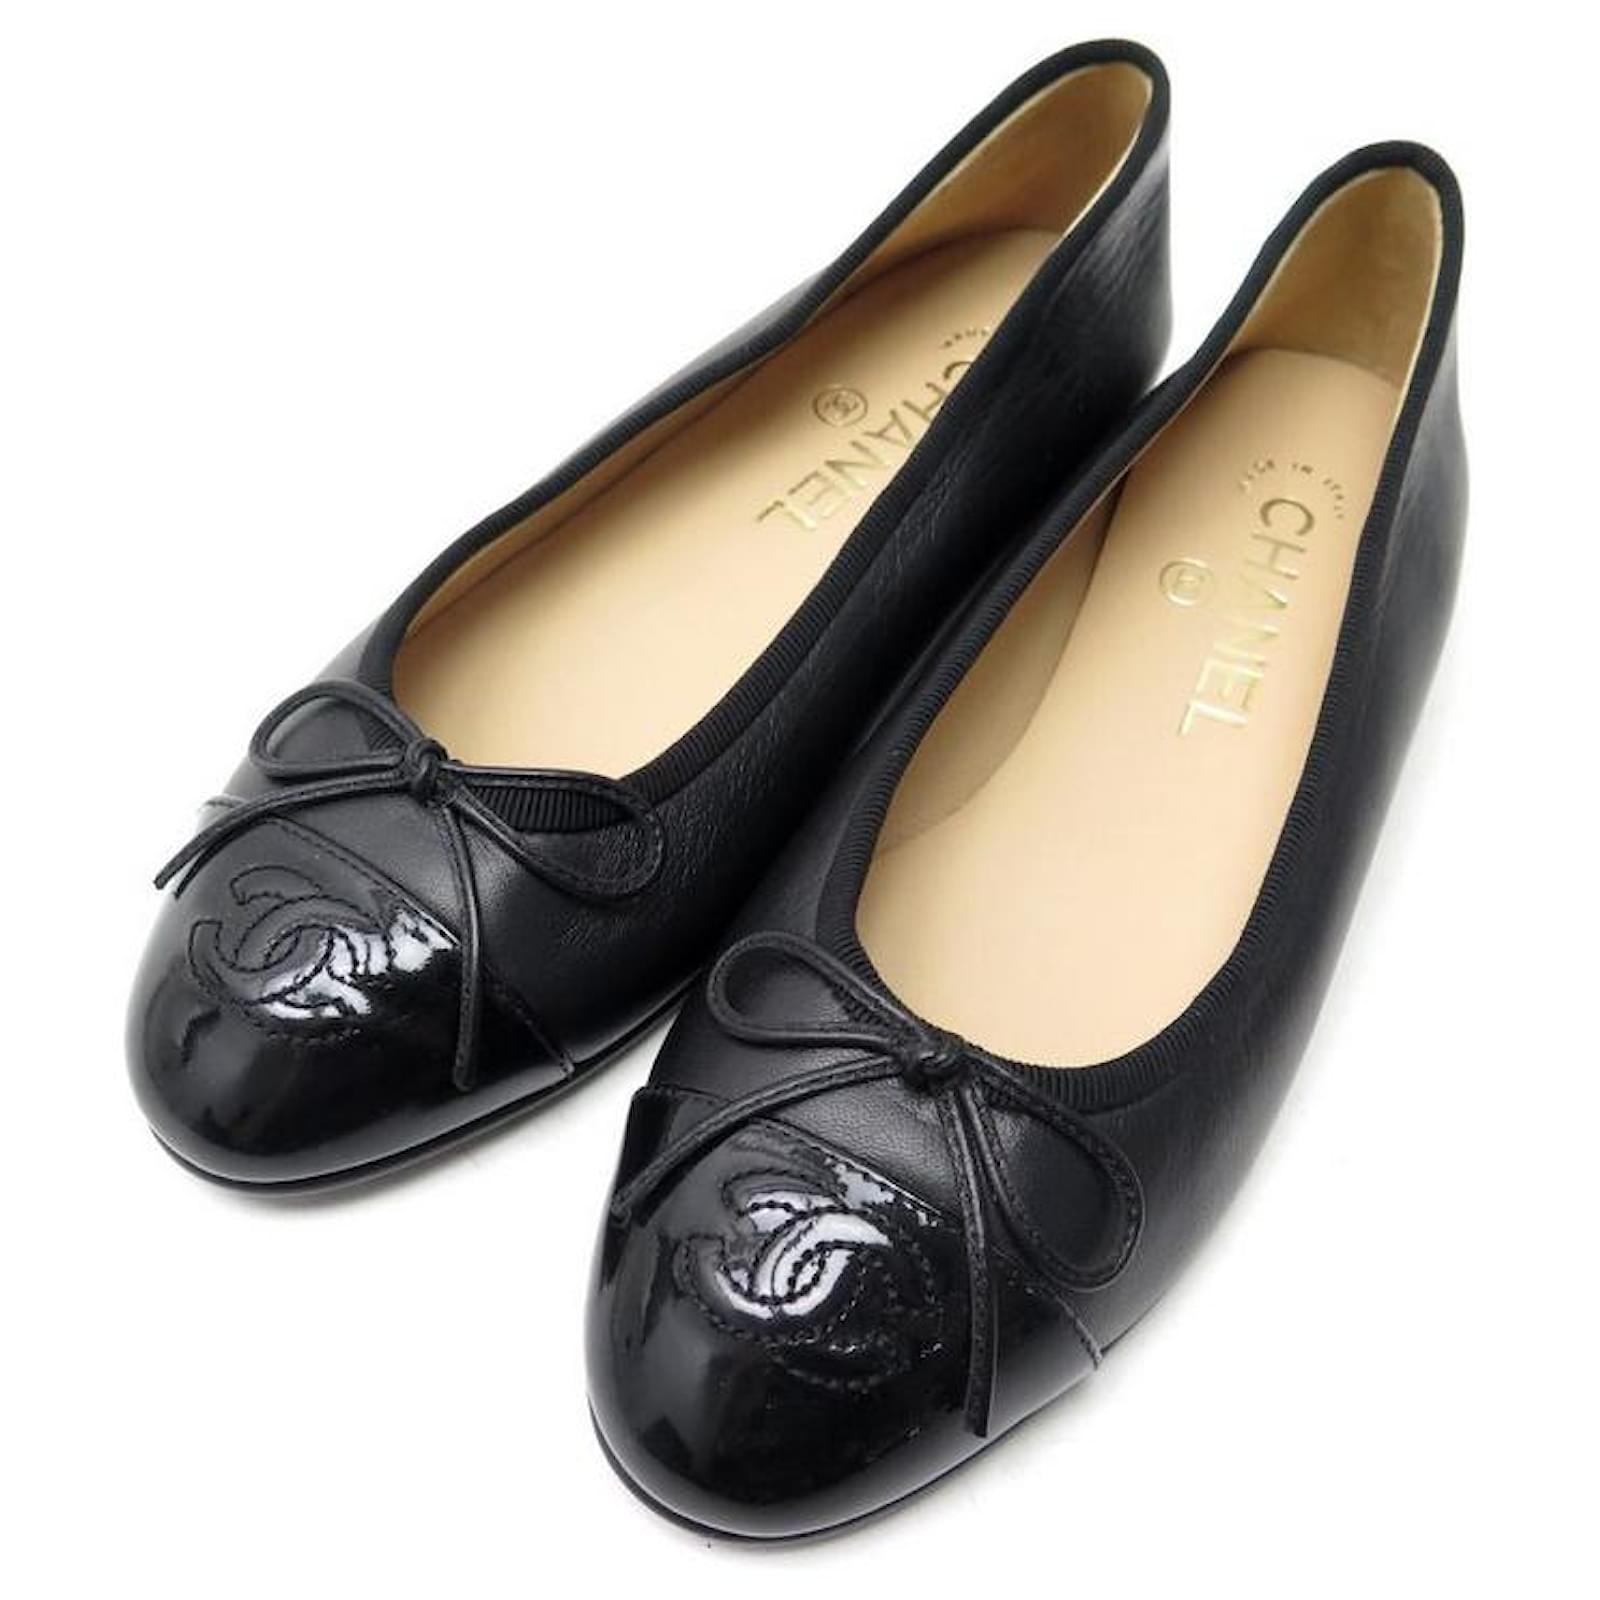 AUTH. NEW CHANEL BALLERINA FLATS SHOES BLACK WHITE PATENT LEATHER